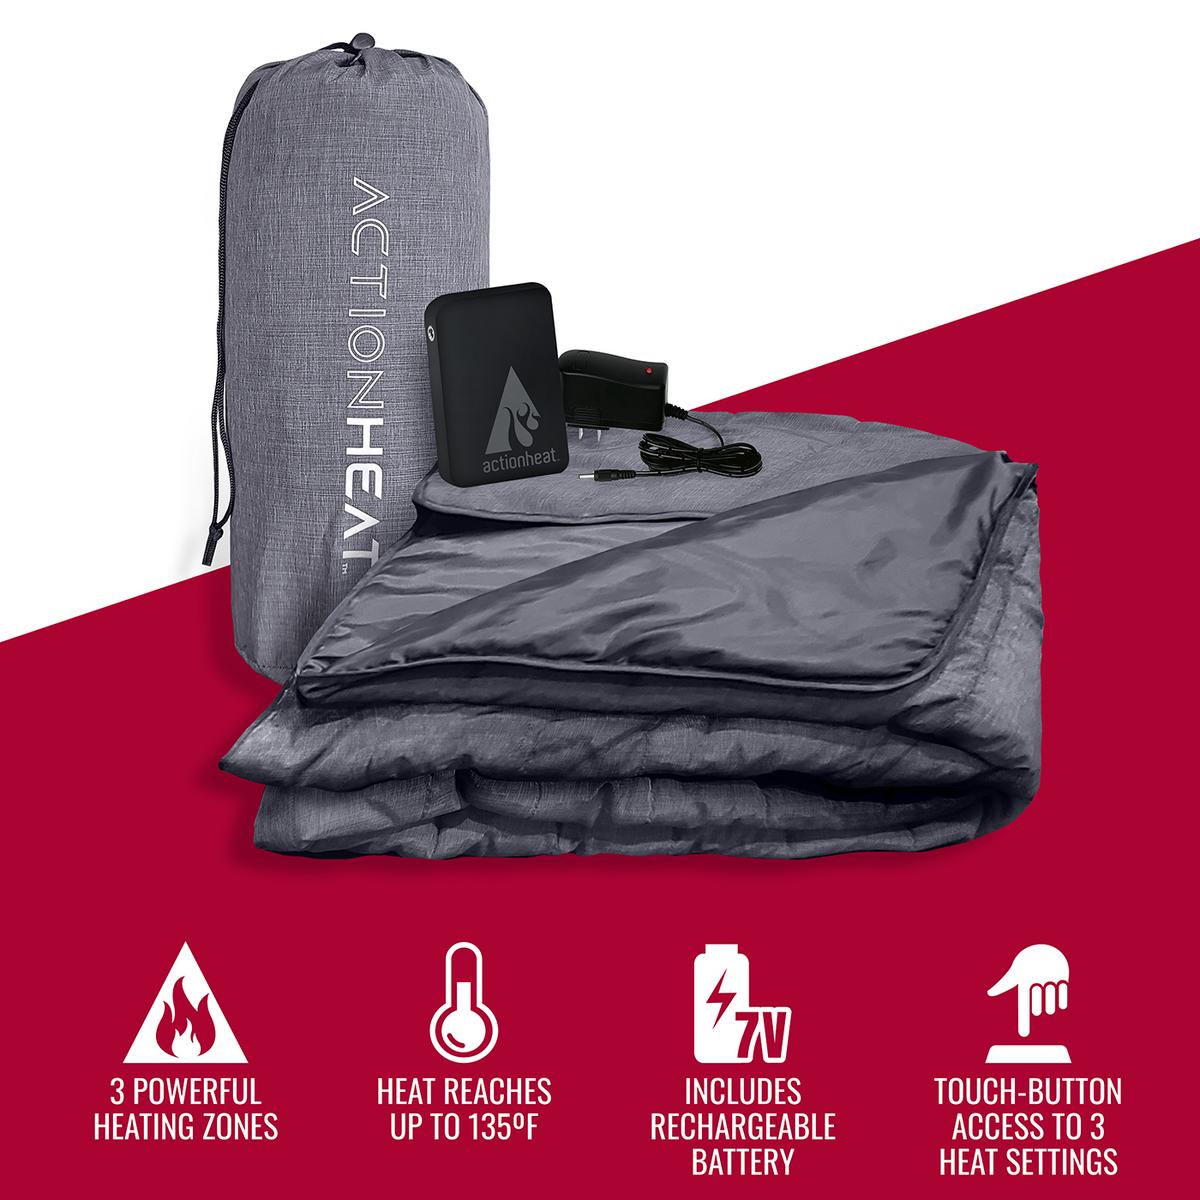 ActionHeat 7V Battery Heated Throw Blanket - Right